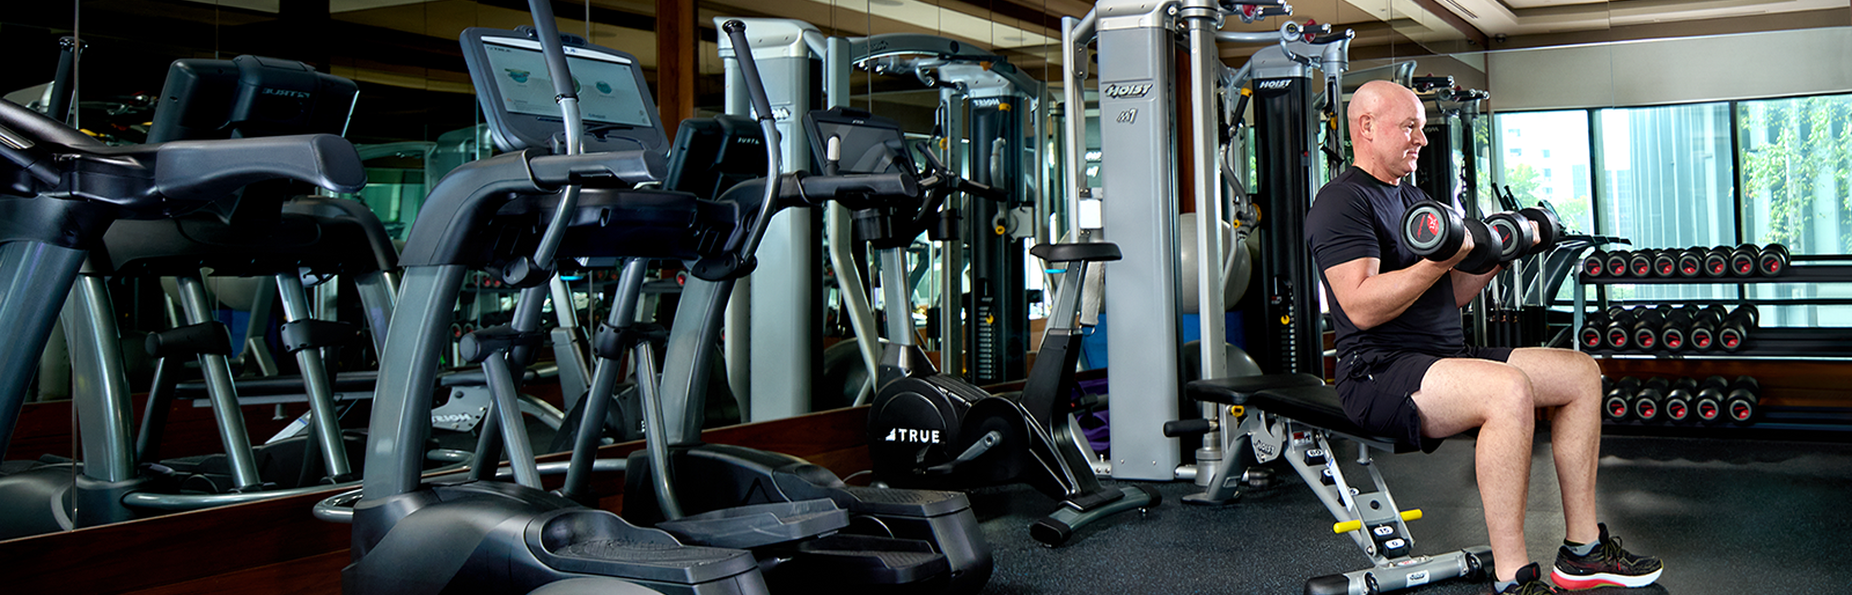 gym with state-of-the-art equipment